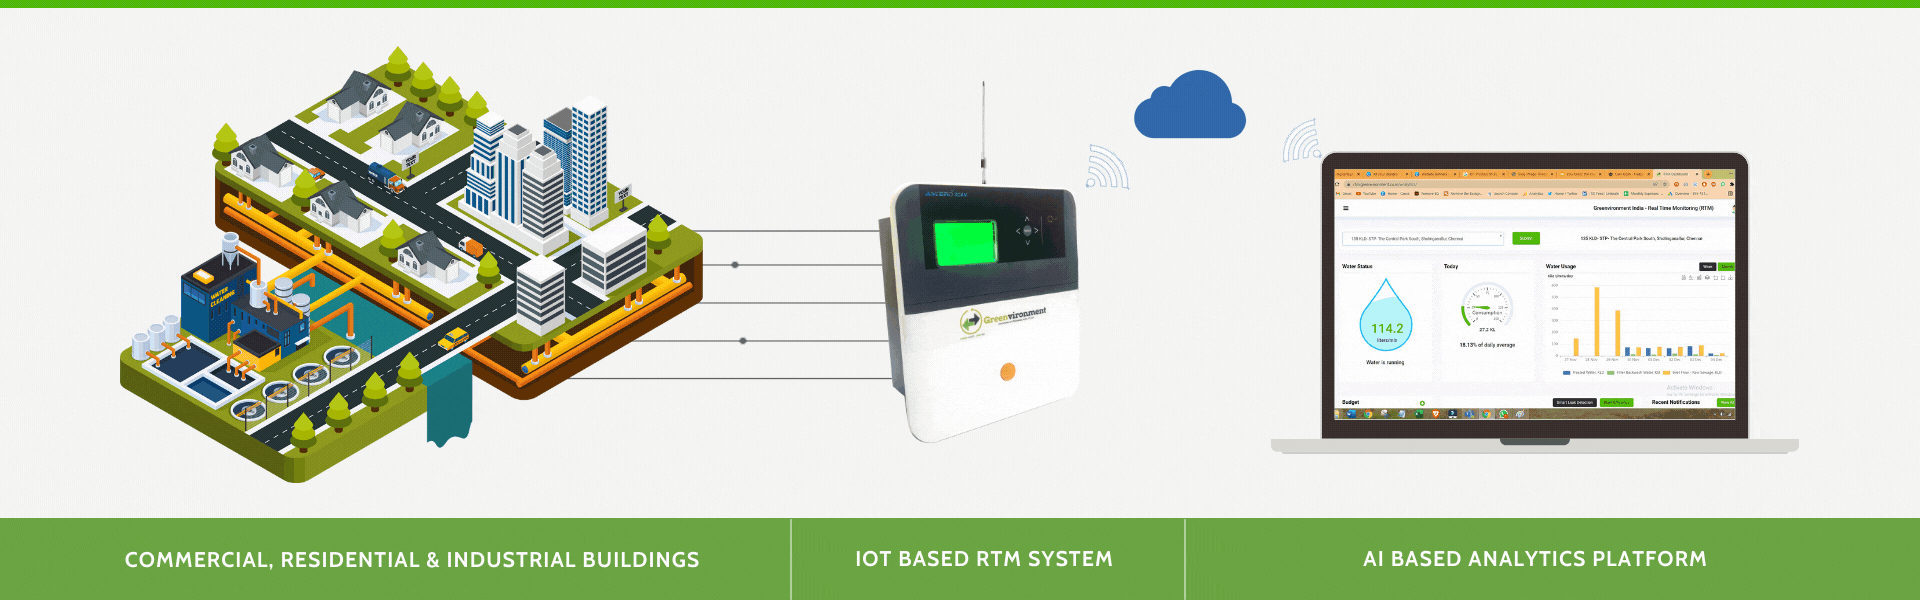 Real Time Monitoring (RTM) 2.0 device helps monitor the water quality, quantity & increases efficiency of the treatment plants